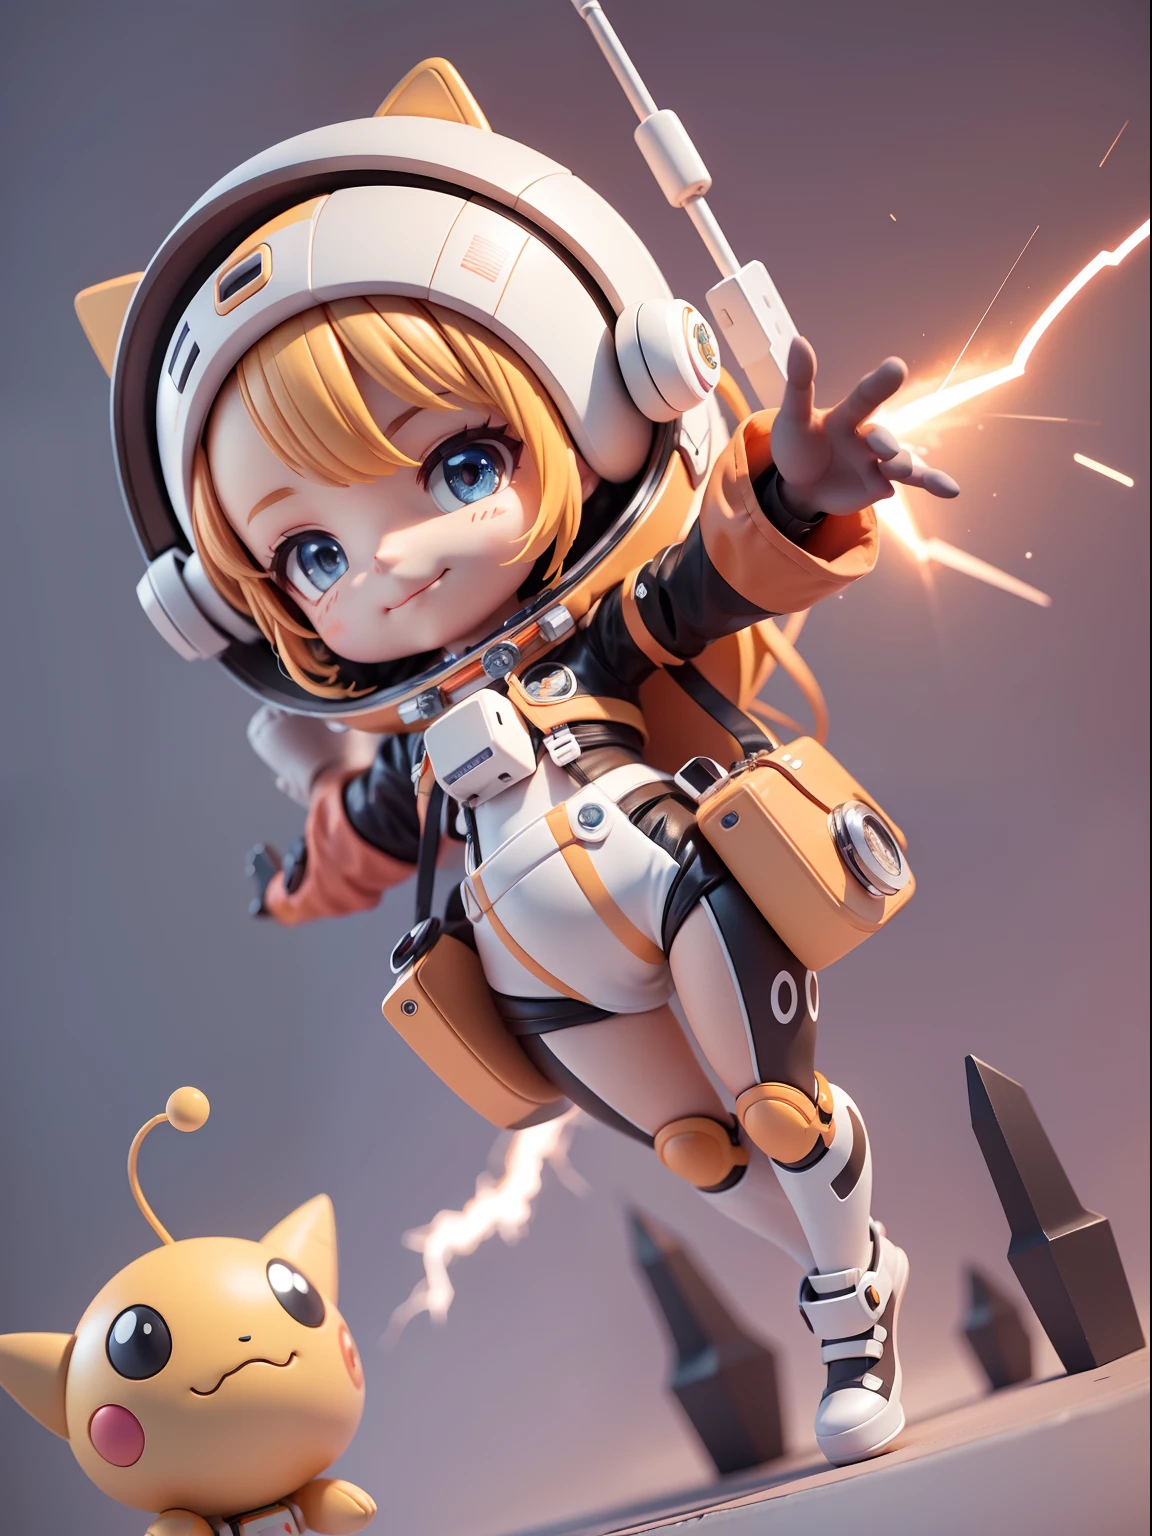 Cute girl ride on spaceship, Smile and cute pose ,Orange and white color, (Cute Astronaut: 1.331), Cute Style, Small, Big Head, 3D Rendering, ((Q Version)), Pokémon style, Machine Style, Cinematic Texture, Figures, Pokémon, Movie Lights, Heavy Robotic Arm, Mechanical Belly, Mechanical Legs, Mechanical Legs, Mechanical Sense,  Spinning, Colorful Lightning, Lightning, Cool, Clean White Background, Ray Tracing, Premium Colors, Full Body 3D Model, Action, Stylish Blind Box Toys. (fill body:1.2)，chibi